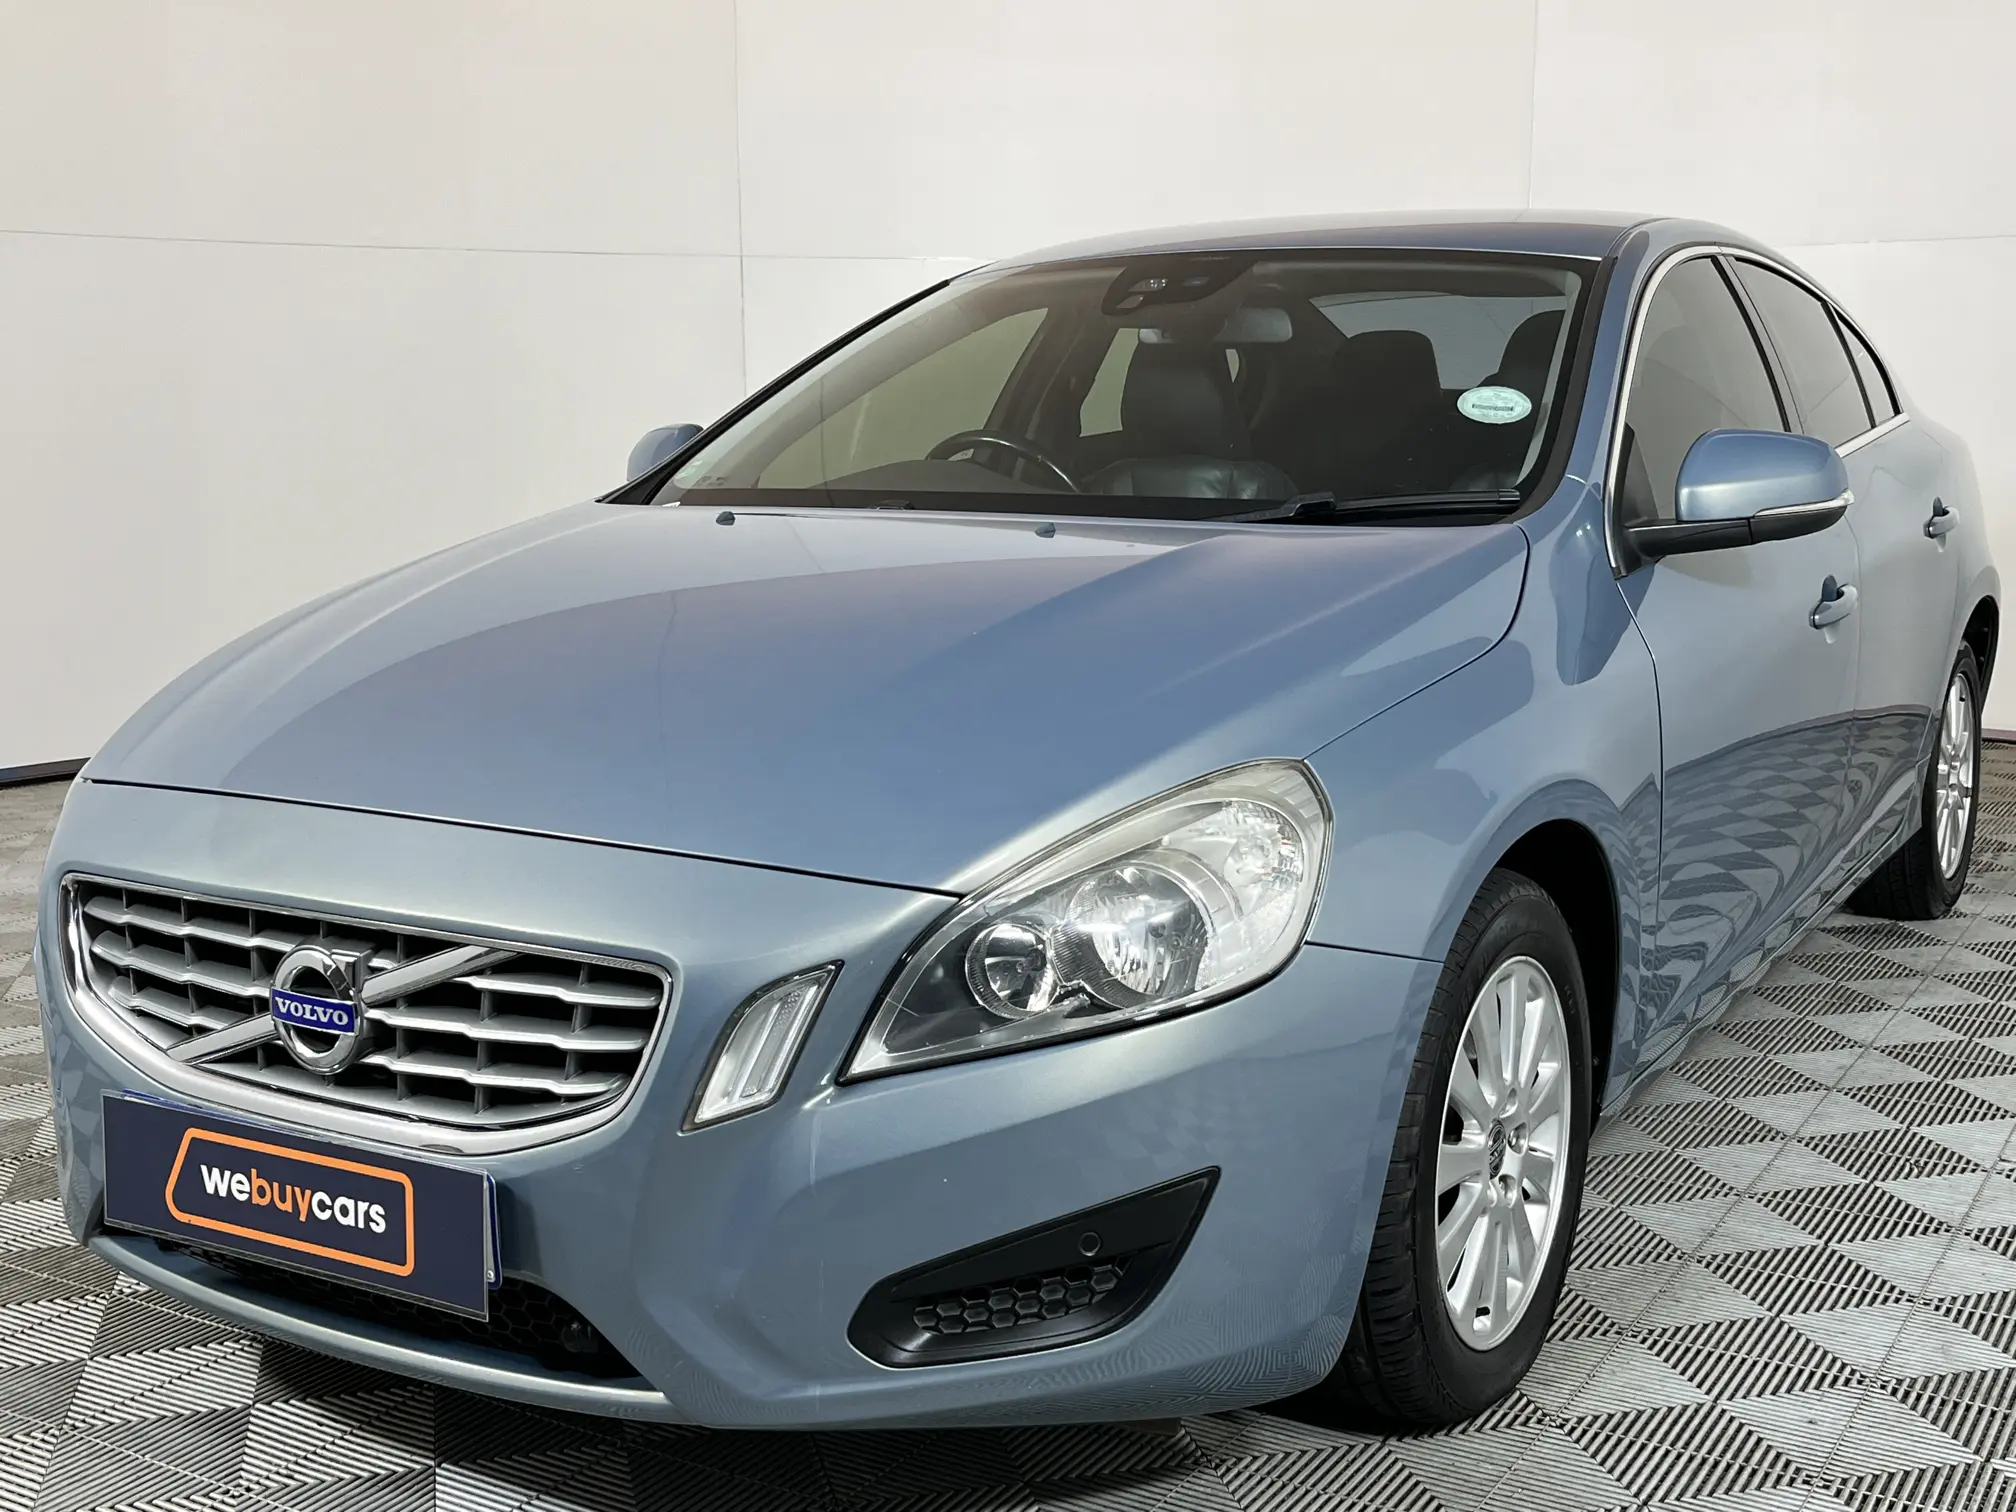 2012 Volvo S60 D5 Geartronic